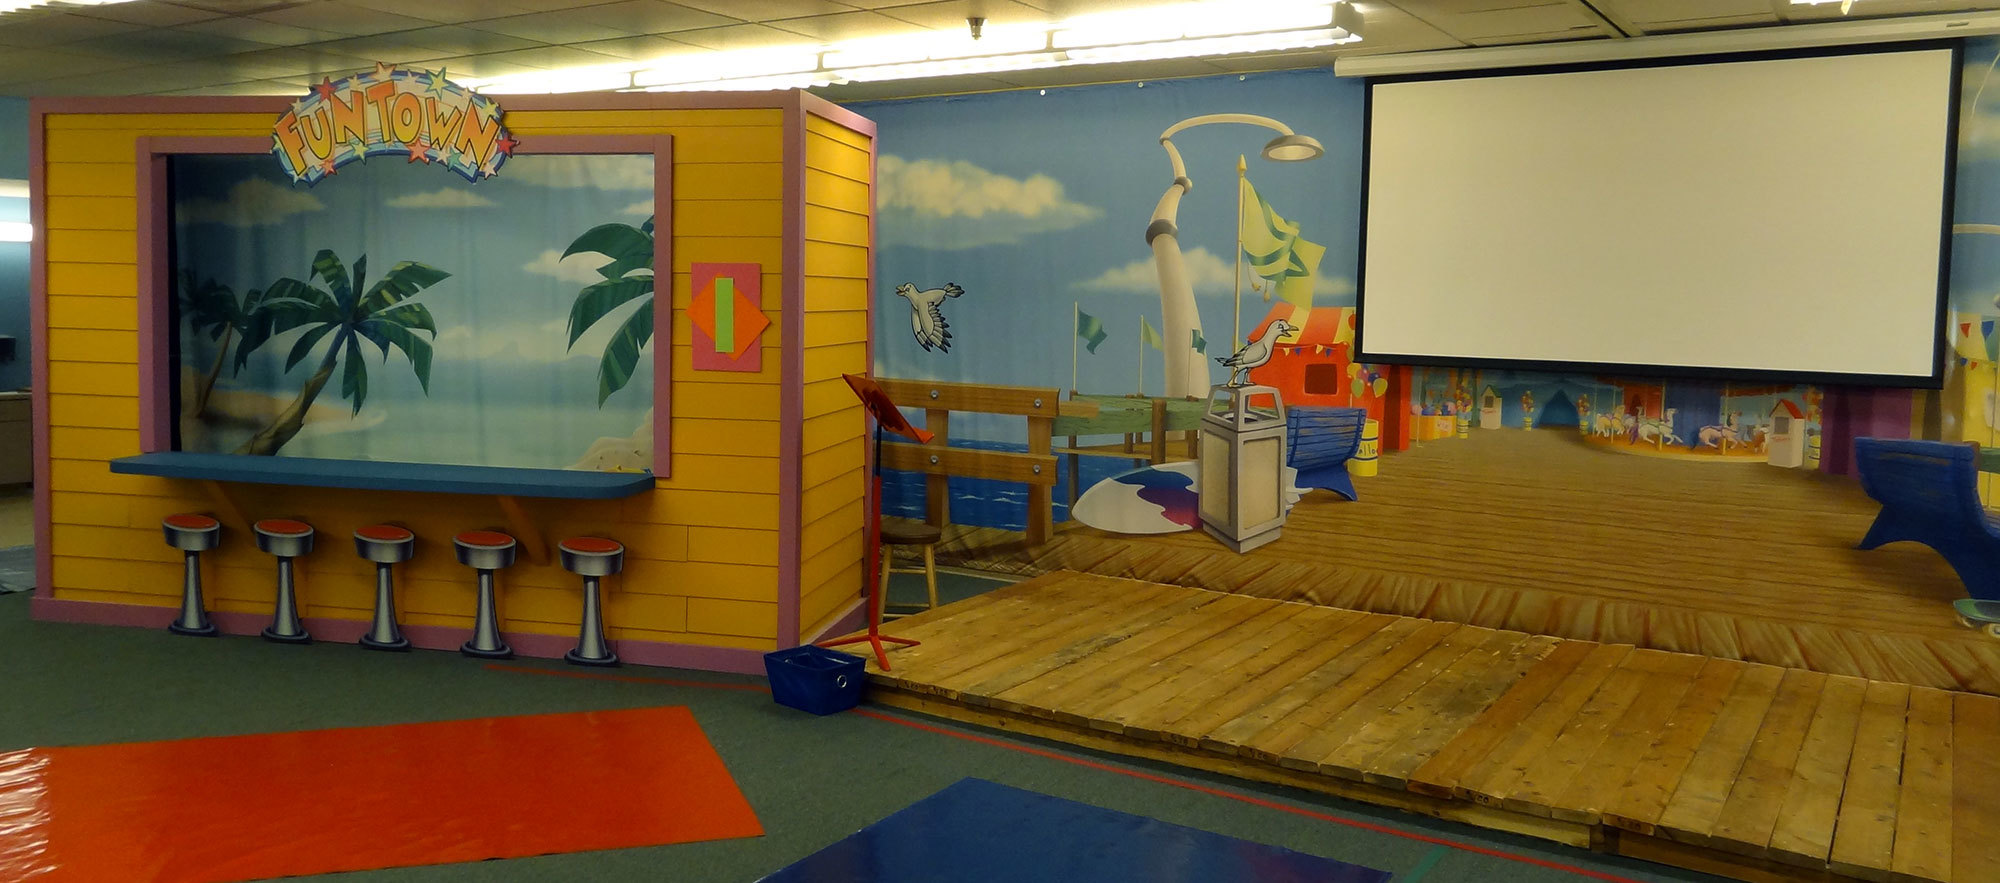 Wooden stage and Boardwalk scene mural plus a 3D puppet stage shack with a beach scene background at a Beach and Boardwalk Stage Themed Environment at Casas Church